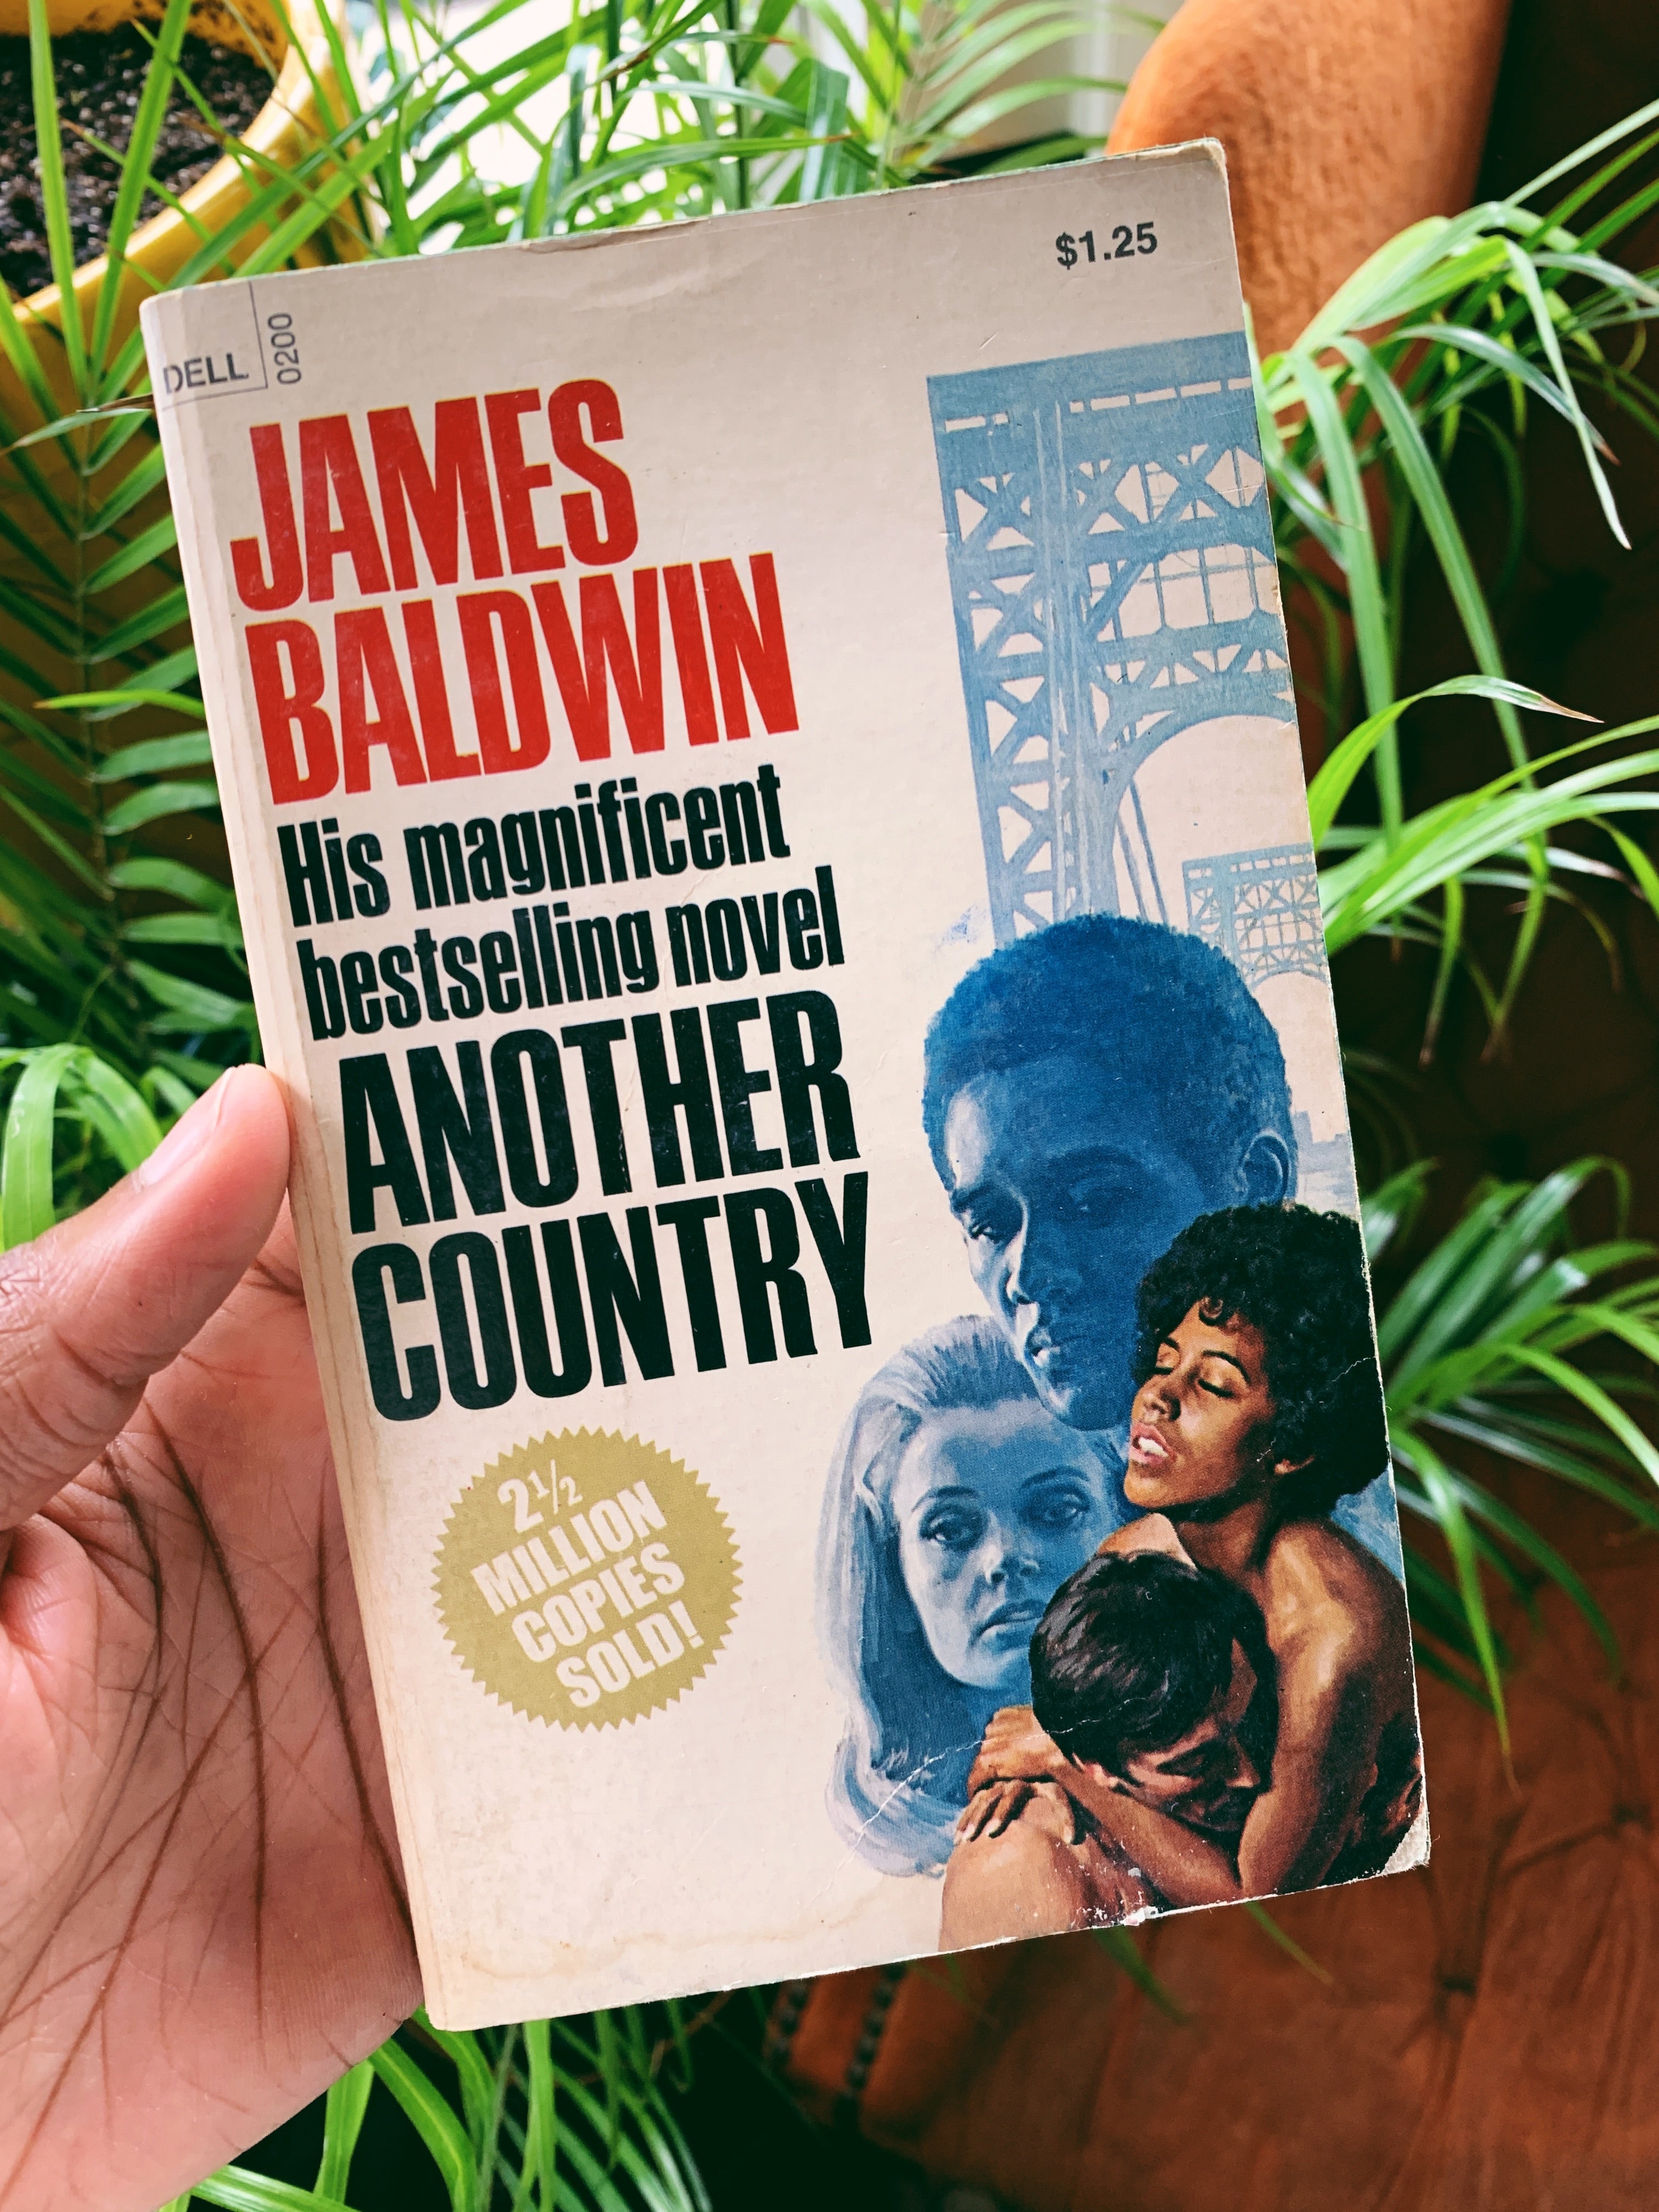 Vintage Softcover “Another Country” by James Baldwin (1962)